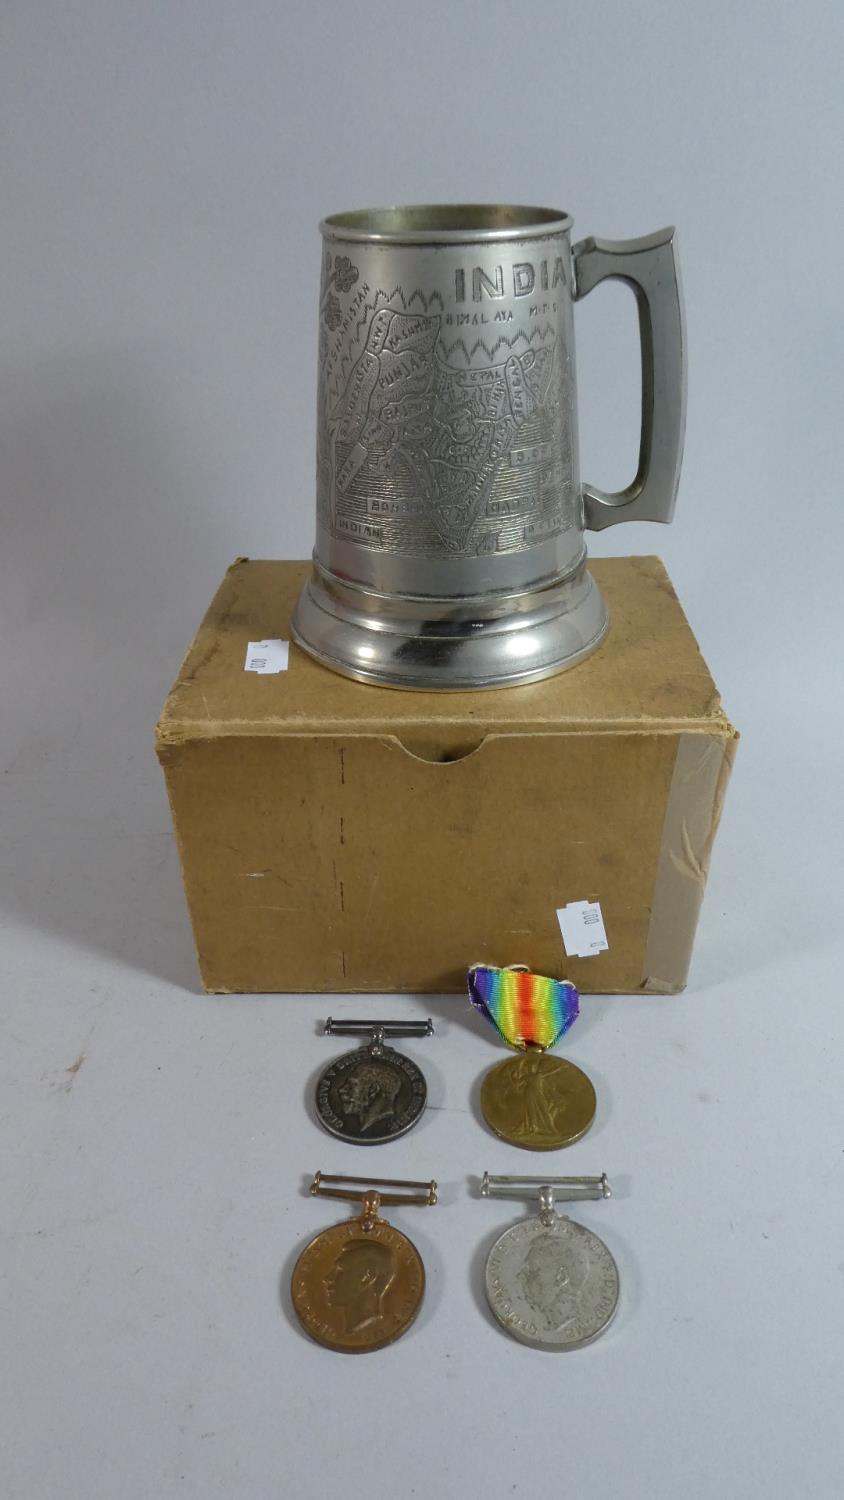 A WWII Indian Campaign Trench Art Pewter Tankard Together with Pair of WWI and WWII Medals Awarded - Image 2 of 3